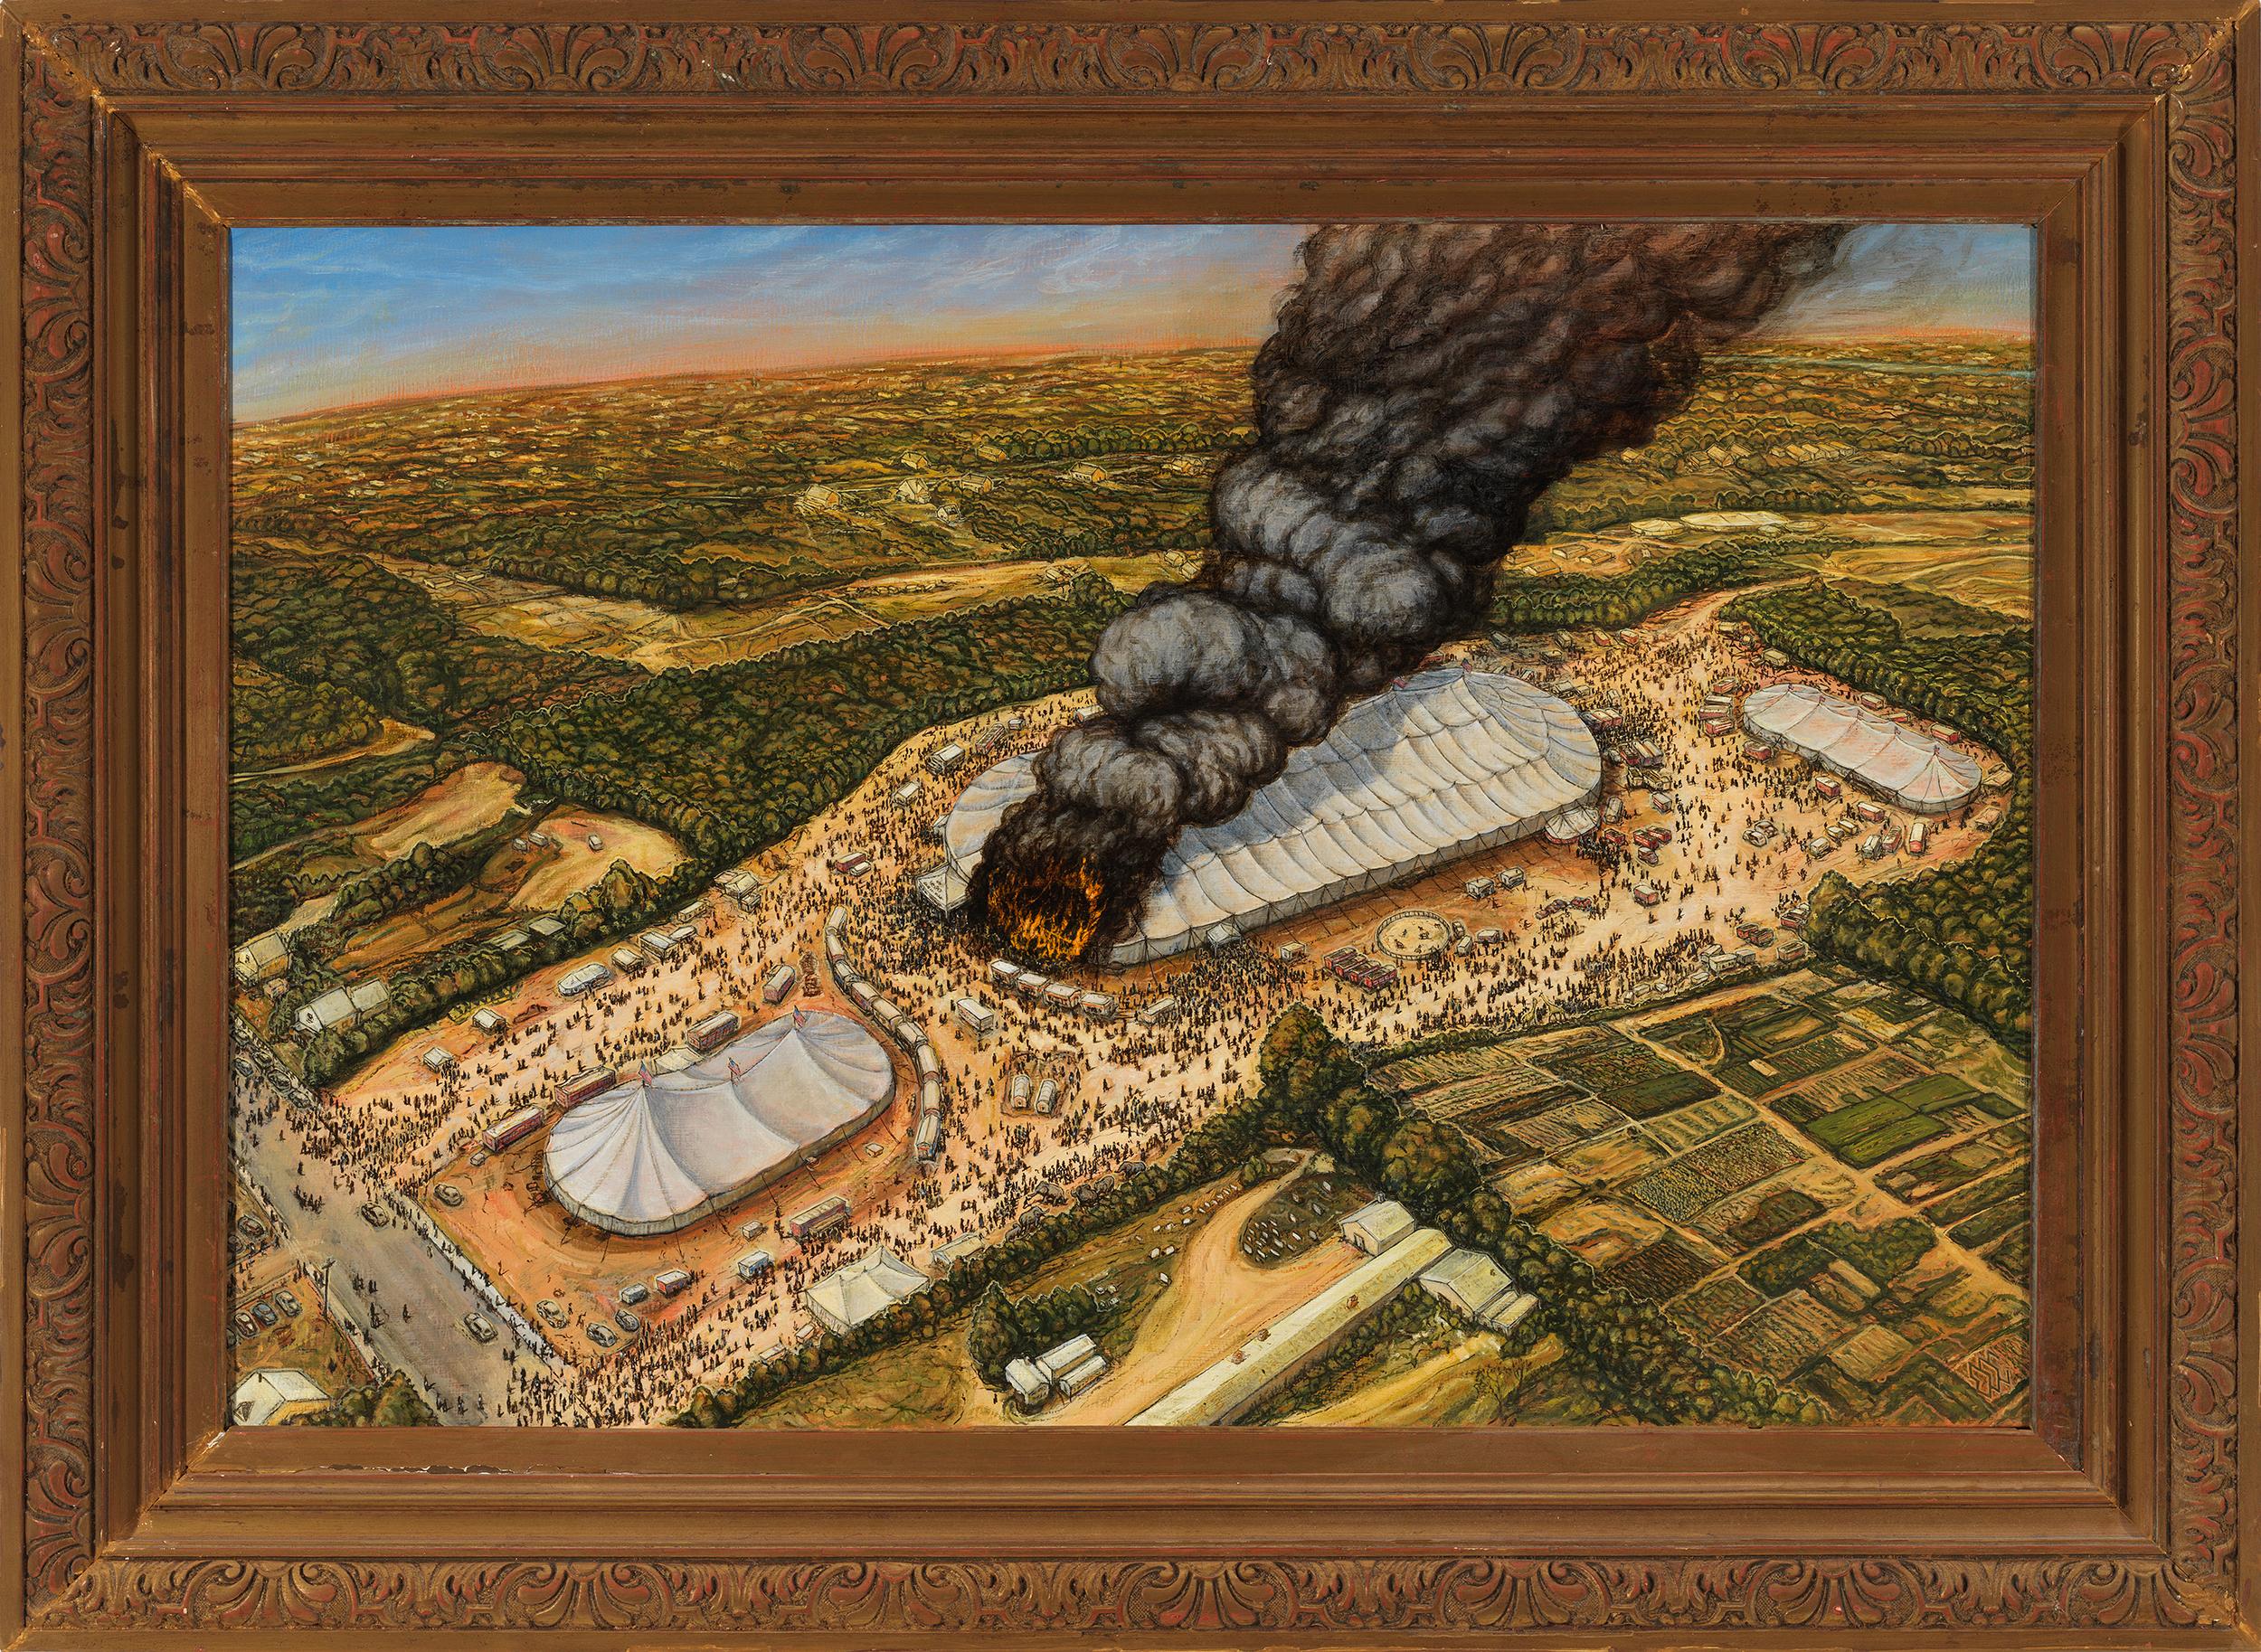 Ringling Brothers Barnum & Bailey Circus Fire of 1944 - Historic Disaster - Painting by Eric Edward Esper